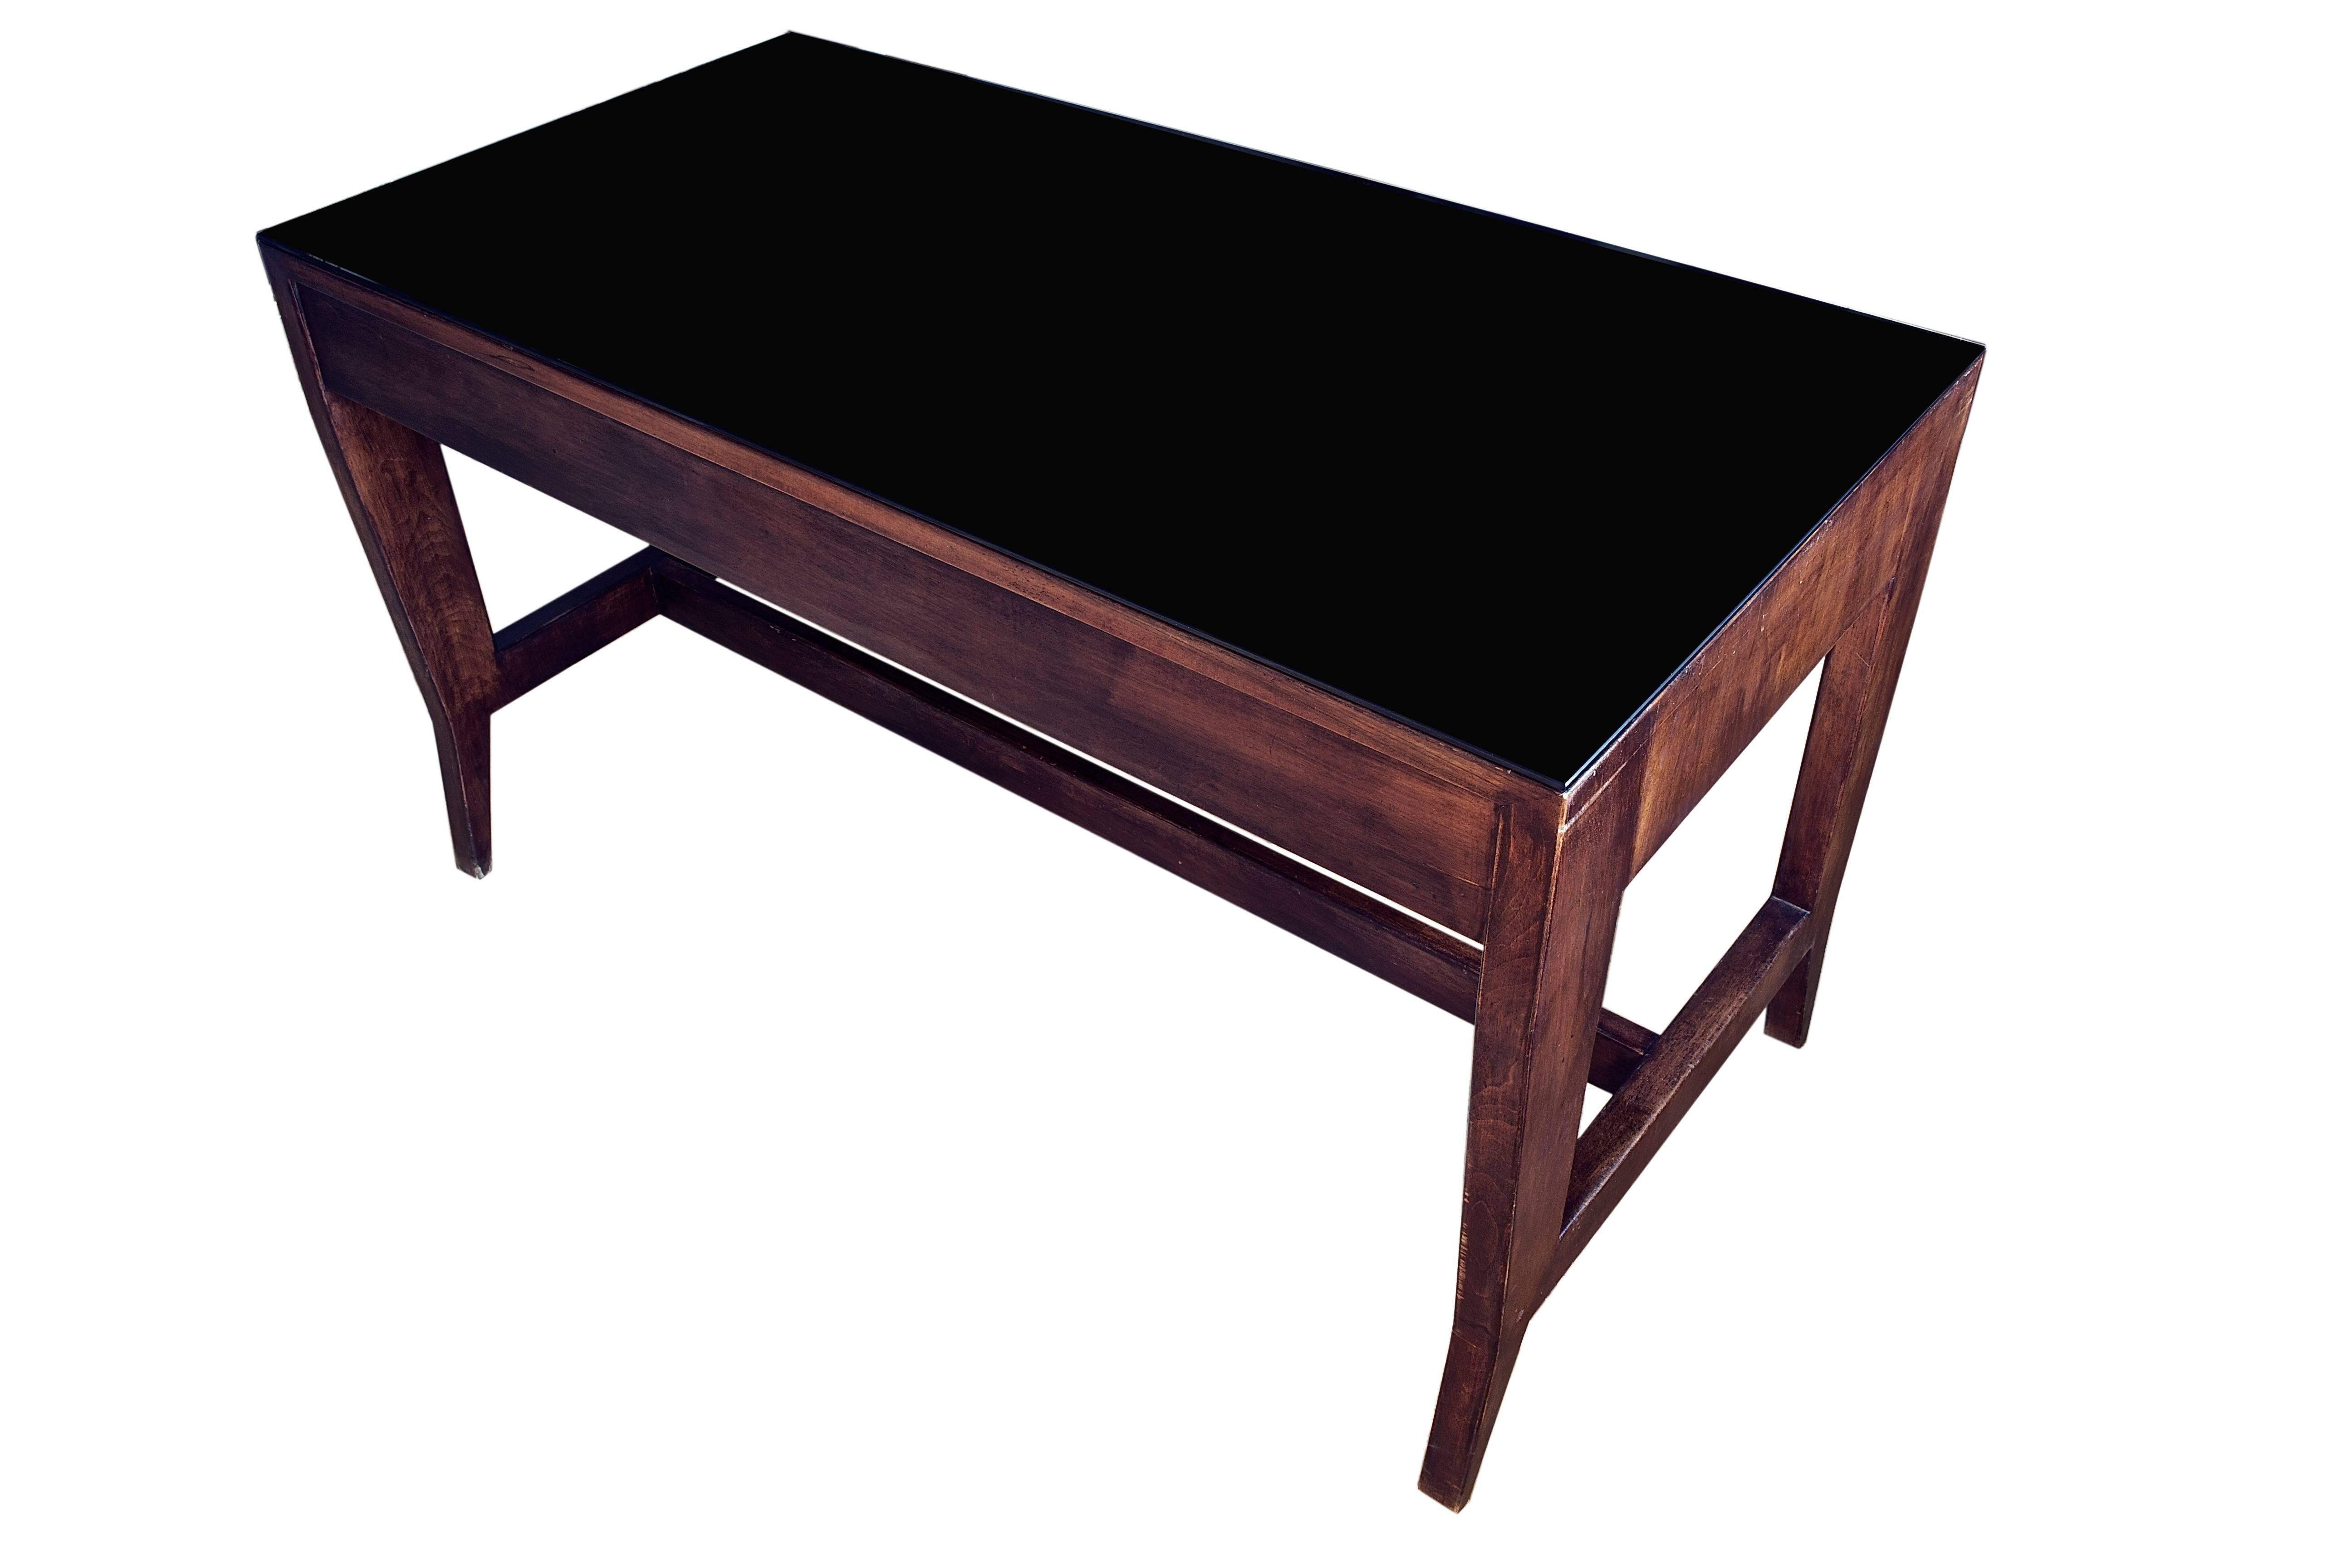 Gio Ponti
Wooden desk in opaline black glass
Produced by Isa for the Italian National Bank of Labor, circa 1950.
 